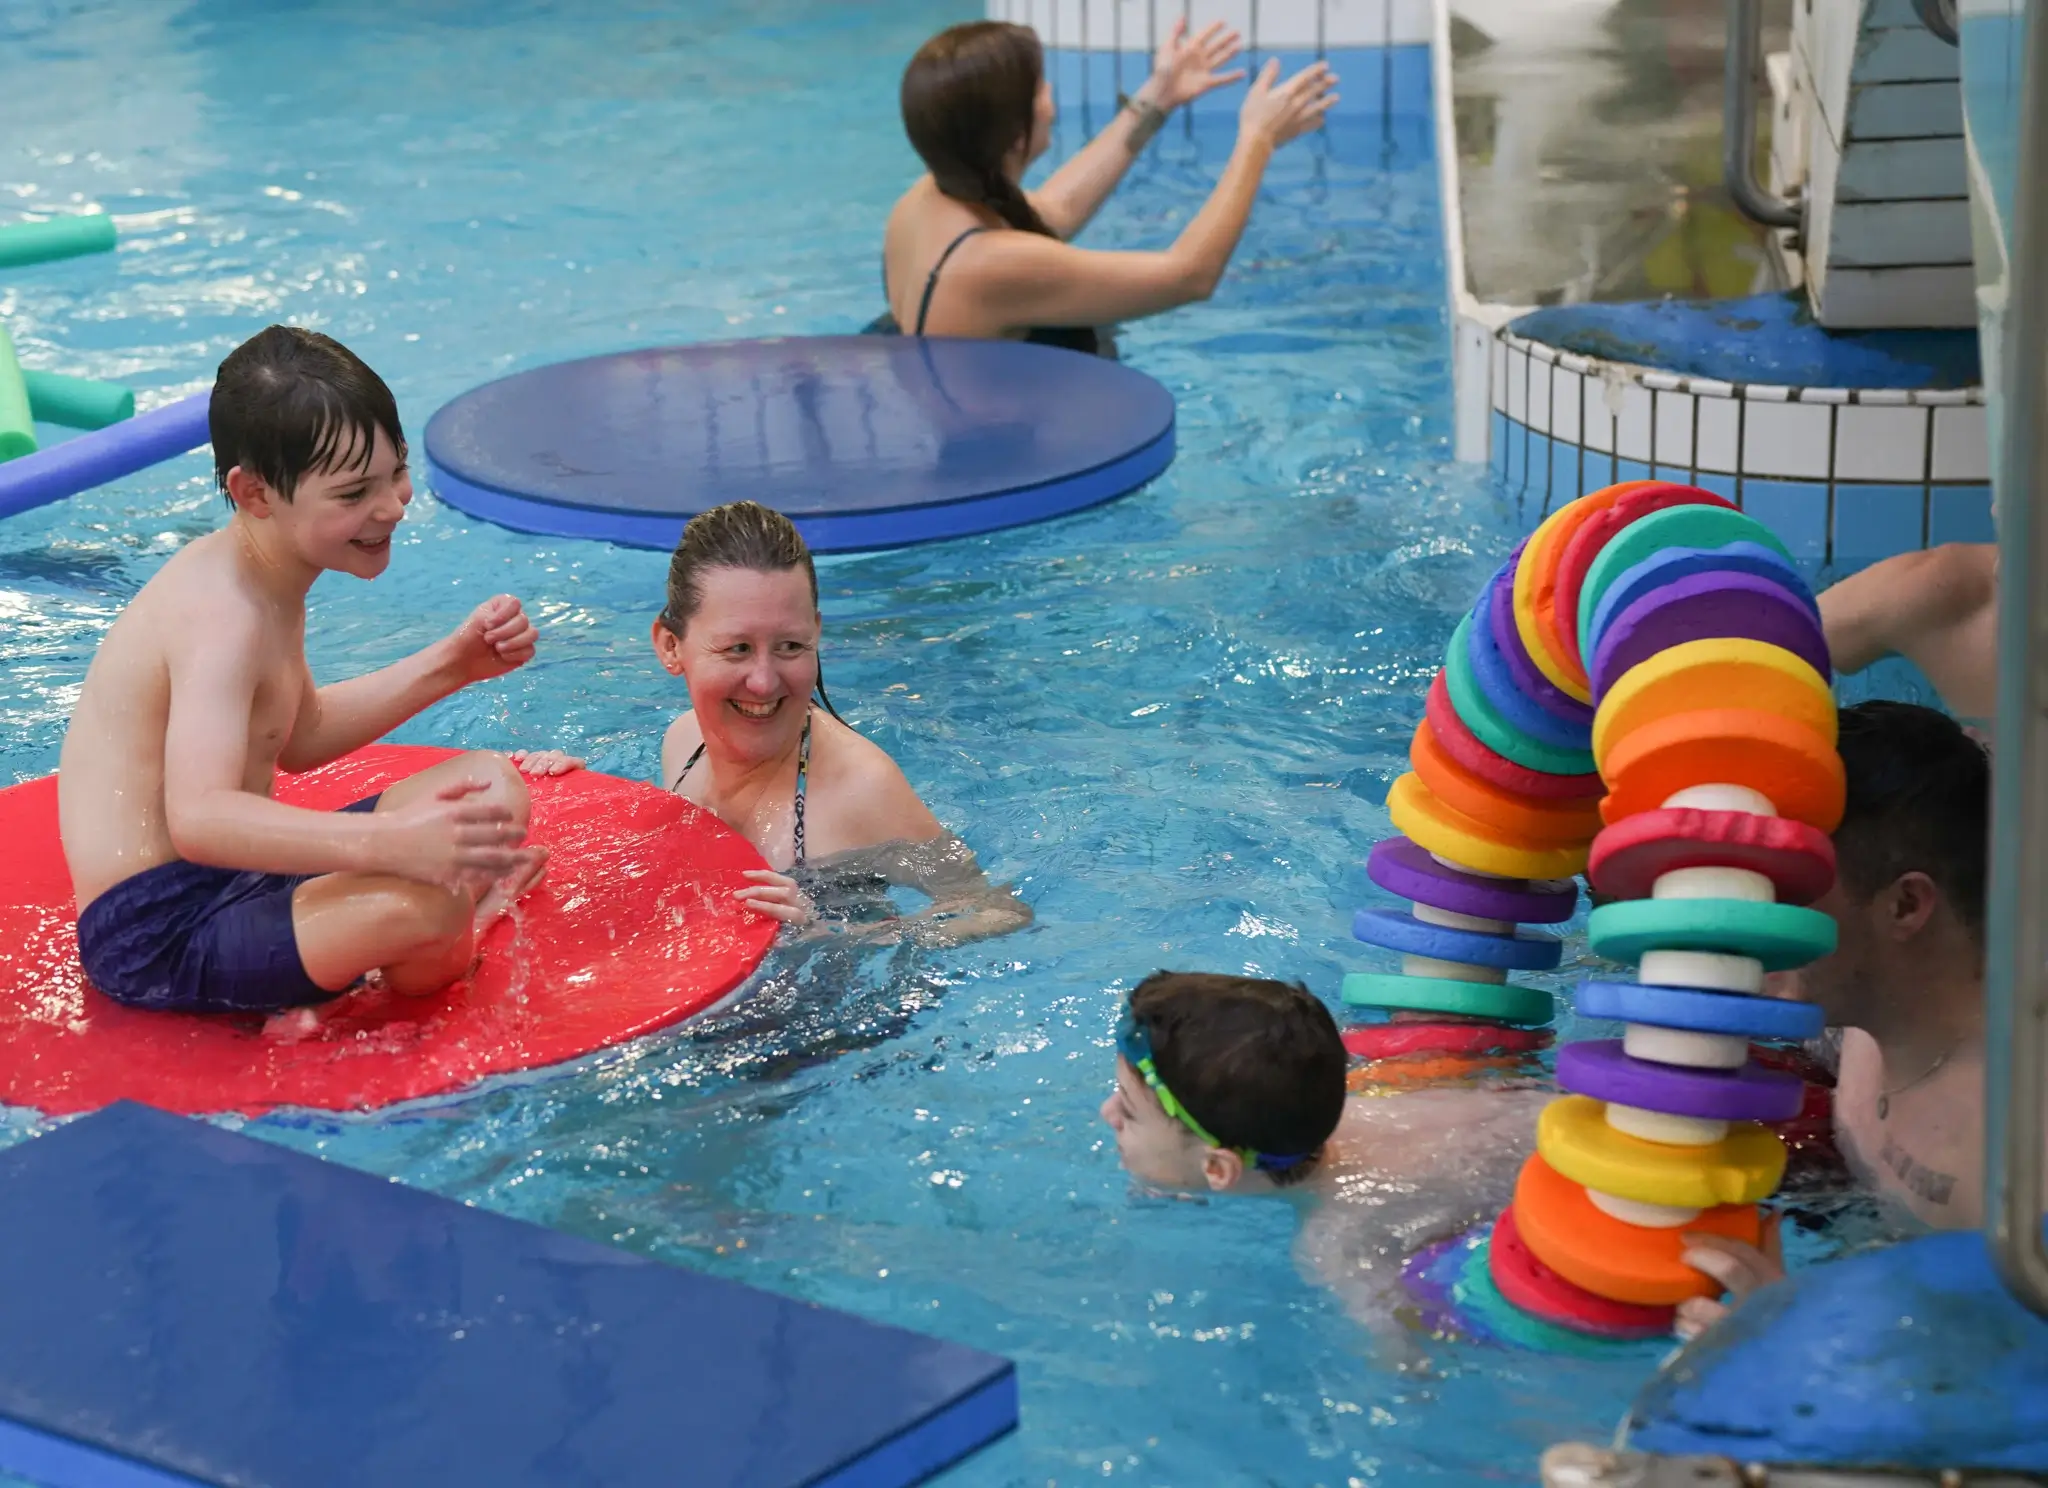 Group of people playing in a swimming pool